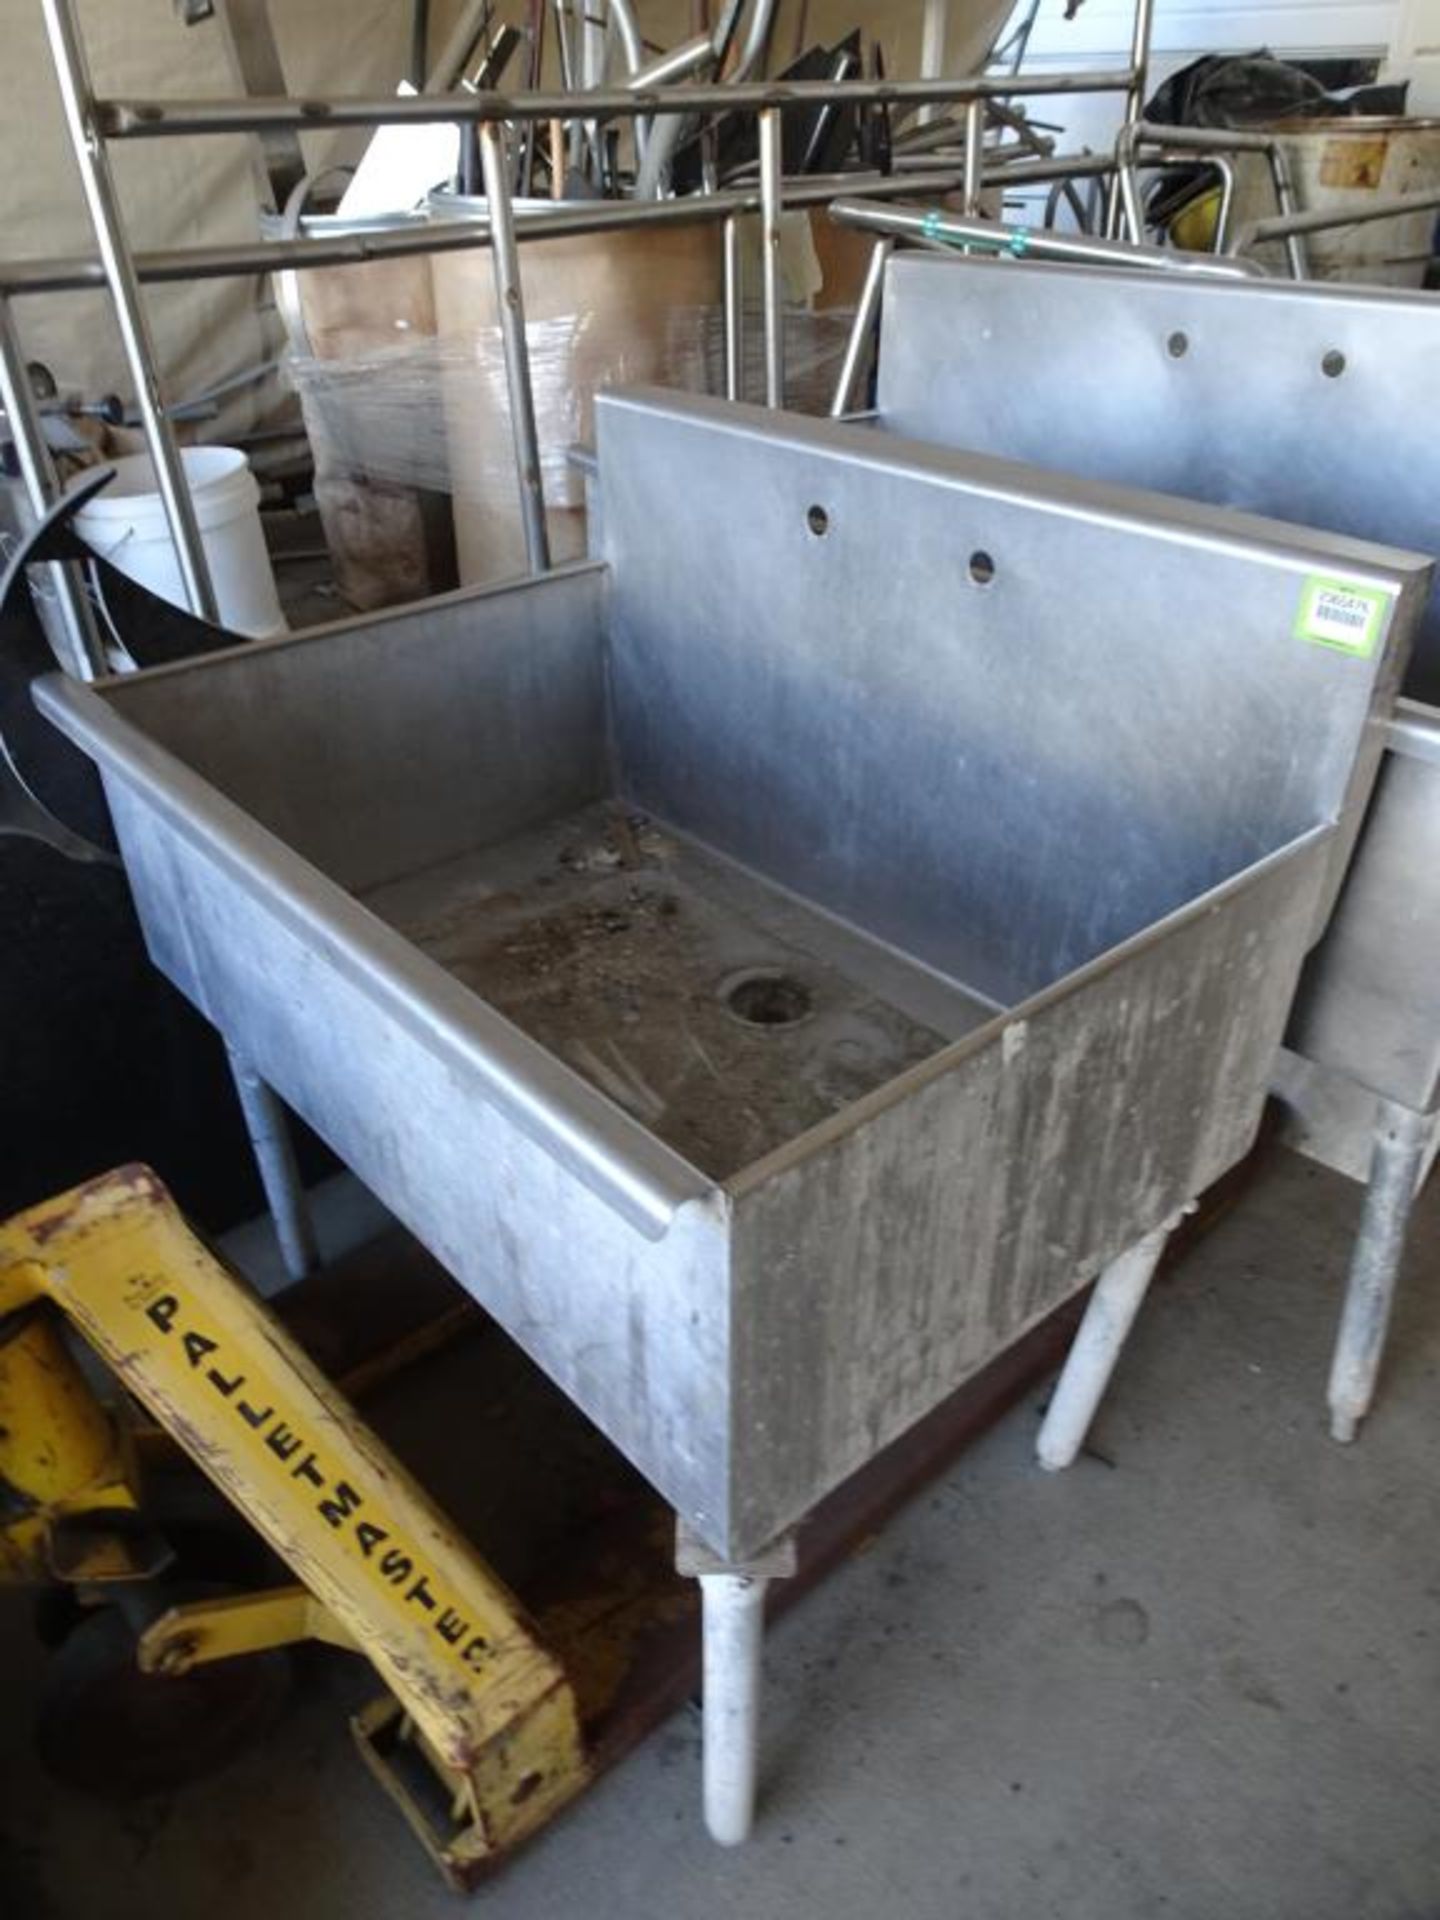 Stainless Steel Shop Sinks - Image 4 of 4